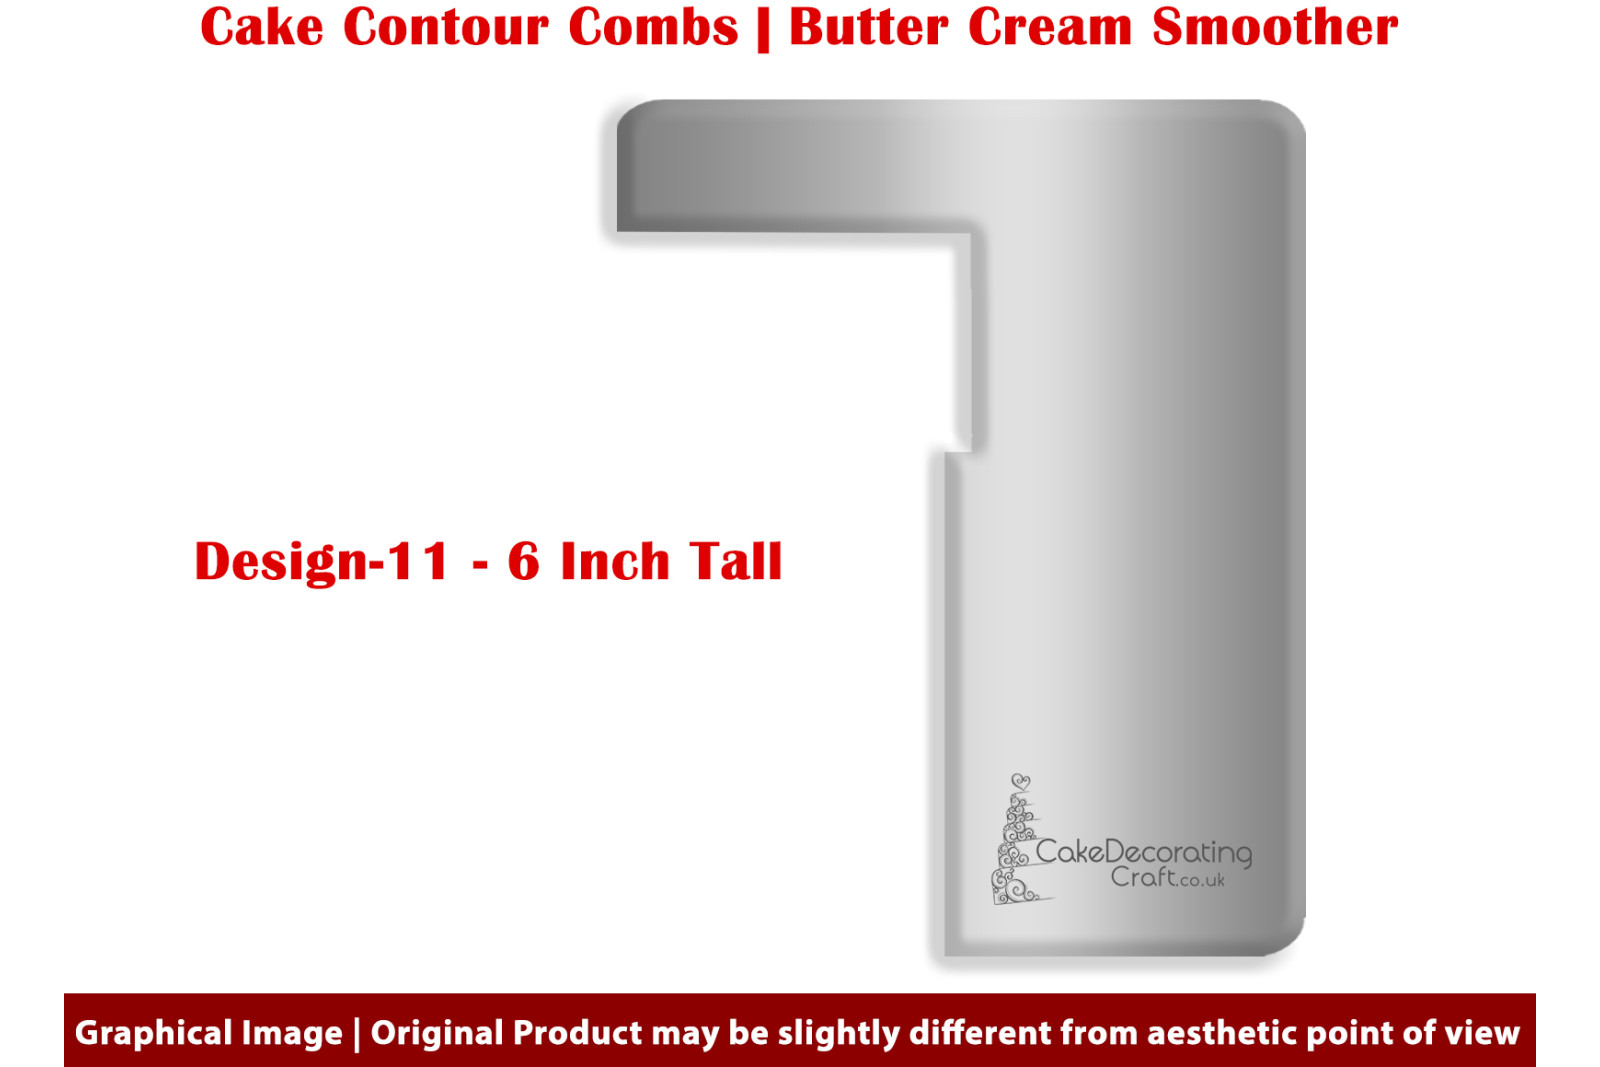 Gift Box | 6 Inch | Cake Decorating Craft | Cake Contour Combs | Smoothing | Metal Spreader | Butter Cream Smoothing | Genius Tool